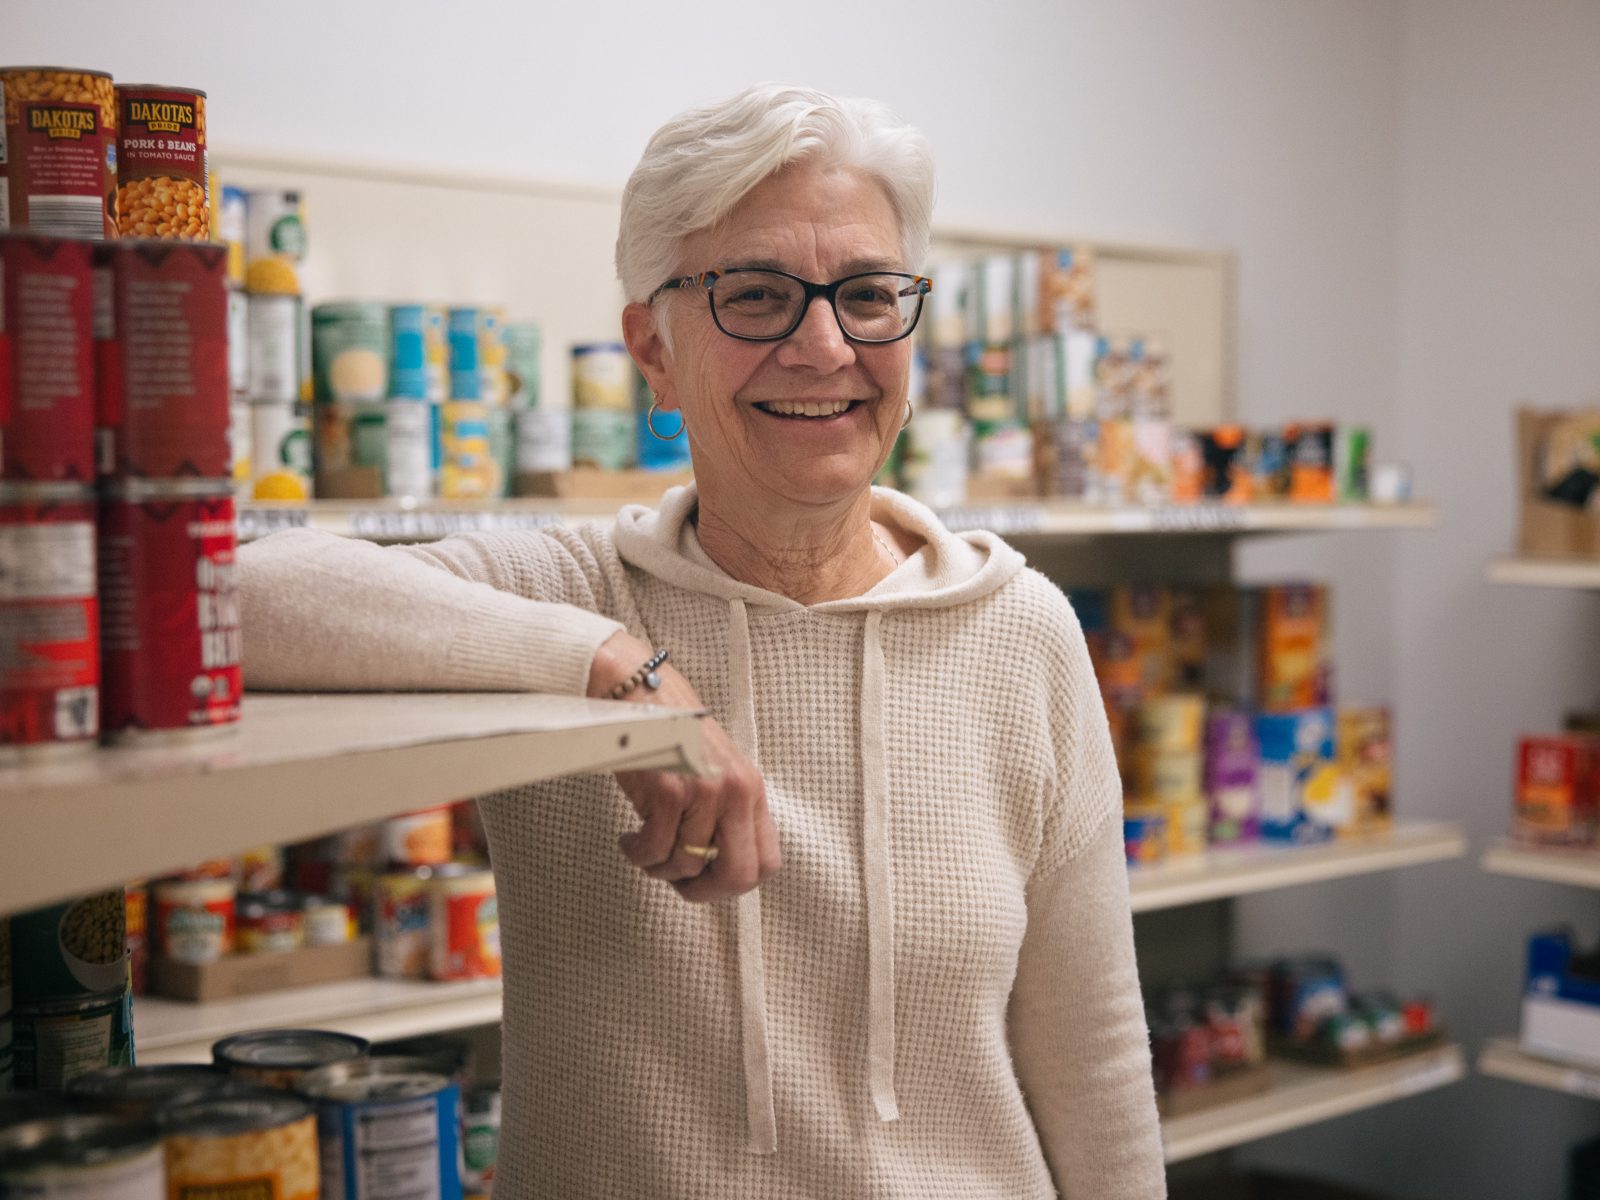 When Denise Johnson volunteers at her neighborhood food pantry every week, she’s carrying on a family tradition.

Her mother Phyllis volunteered at Southern Anoka Community Assistance (SACA) in suburban Minneapolis every Wednesday for 20 years.

Today, Phyllis lives in a memory care unit and struggles to recall moments in her life, including her decades at the pantry.

As a volunteer, Denise honors her mother’s legacy. “They remember her here,” she said. “I feel like I'm following in her footsteps.”

Her parents mentored her to become a volunteer once she retired. Her father Don volunteered, too, helping annually with holiday fundraising and distributions.

After working in respiratory therapy for 47 years, Denise retired in September 2021. Working through 18 months of the COVID-19 pandemic was “the most rewarding and difficult time of my career,” she said.

As a volunteer at SACA, an agency partner of Second Harvest Heartland, she assists her neighbors as they shop the client choice pantry.

She loves to see the “smiles on their faces” as they do “their own grocery shopping, which is a fundamental thing that we all get to do,” she said.

“I live in the community, and I knew I wanted to do something to support Columbia Heights and Anoka County,” she said. Hunger “is here, and it’s in every community.”